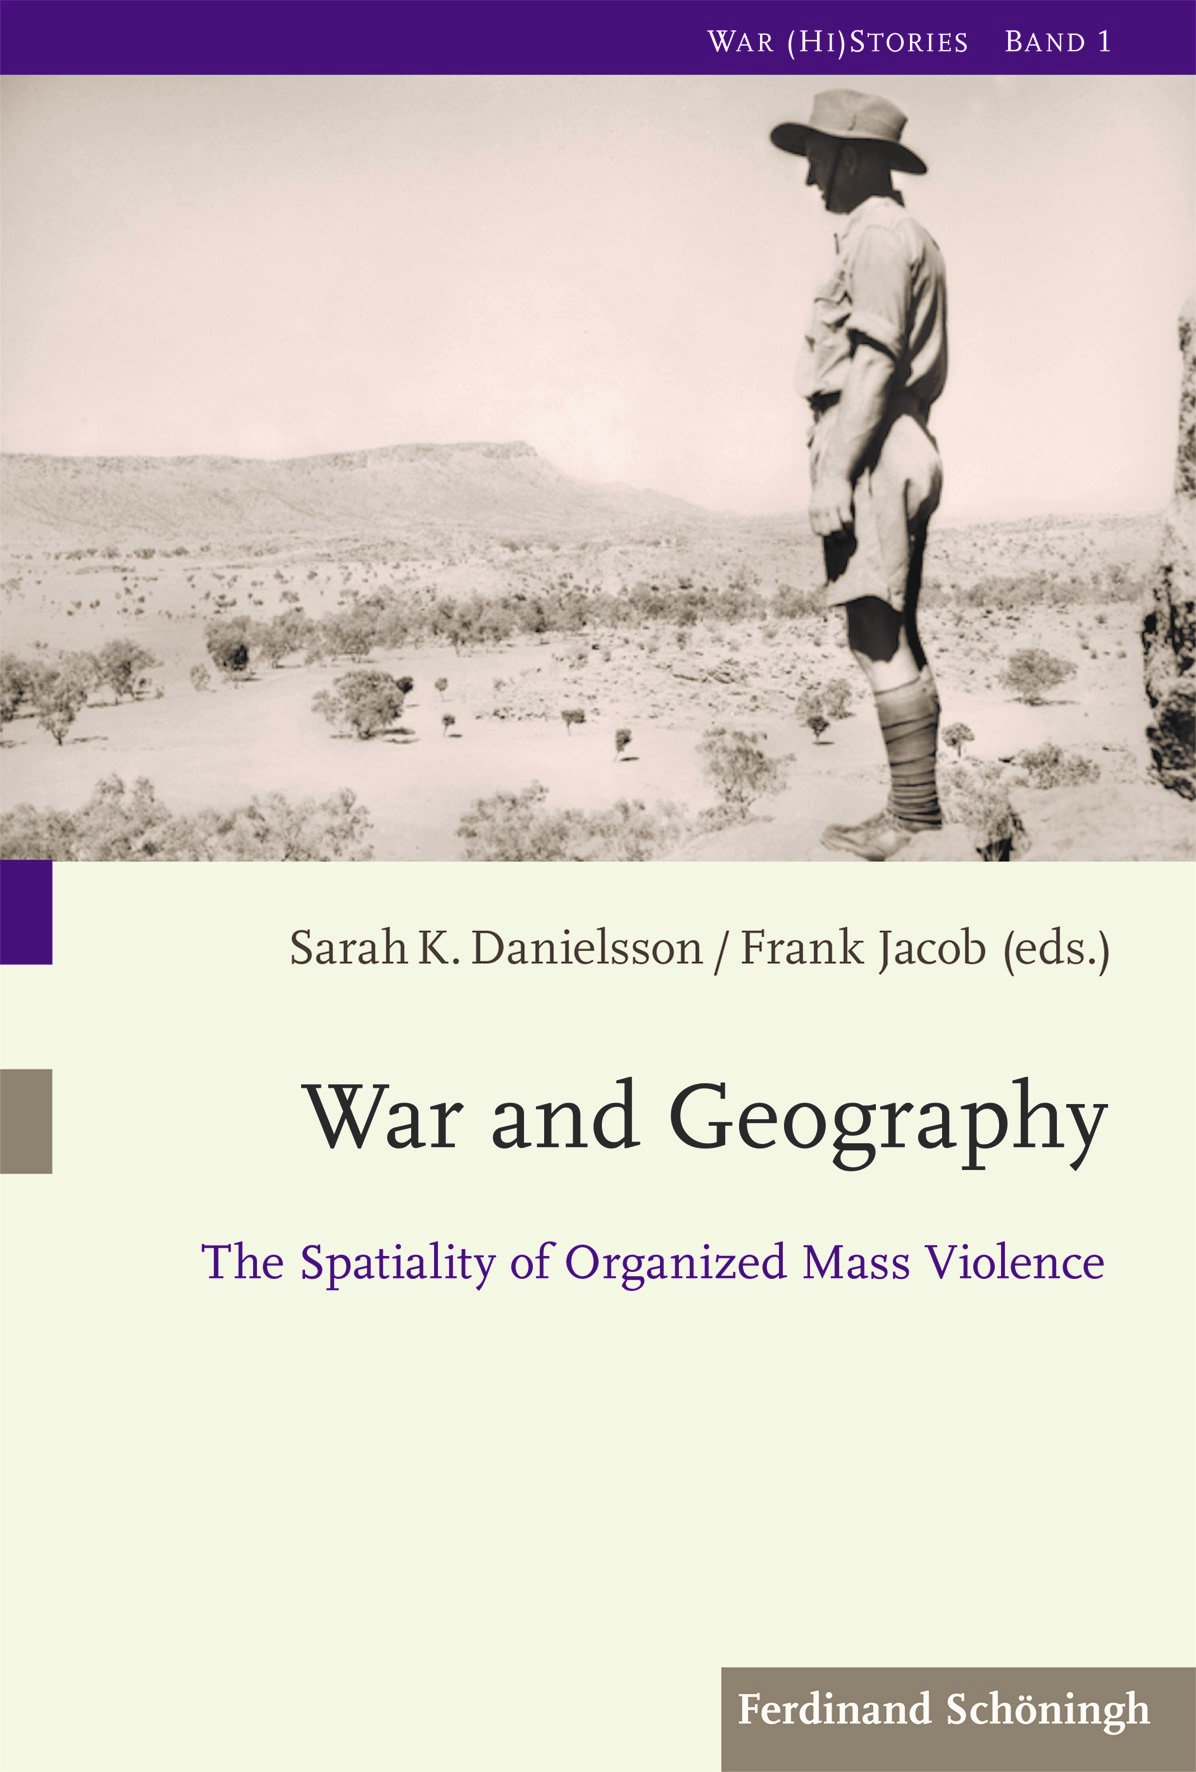 "War and Geography" book cover